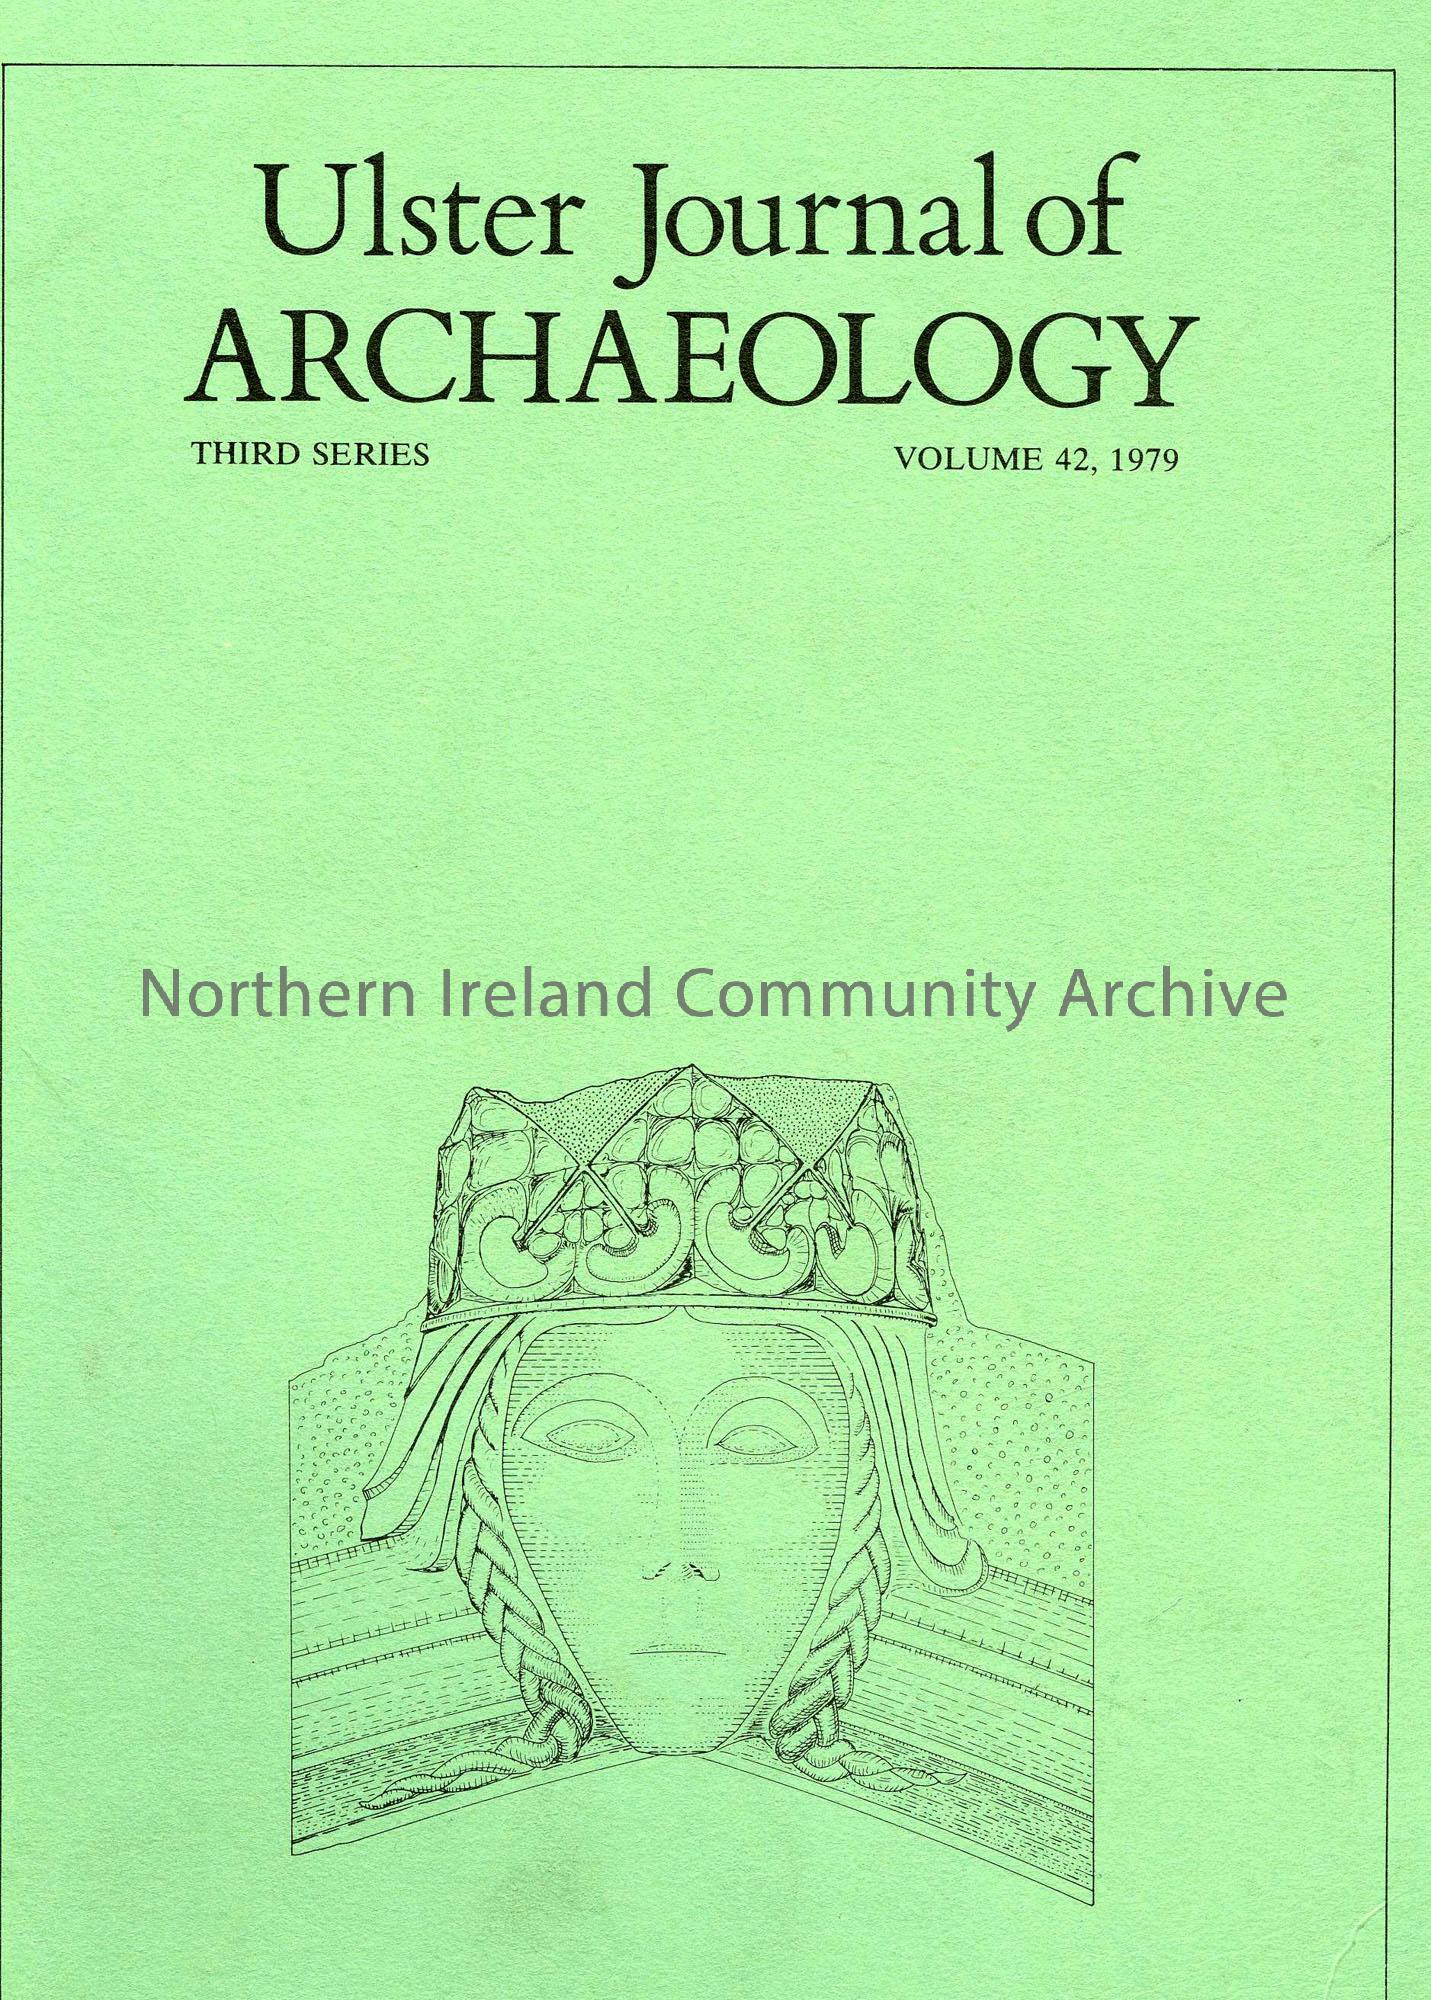 book titled, Ulster Journal of Archaeology. Third Series Volume 42, 1979 (3991)